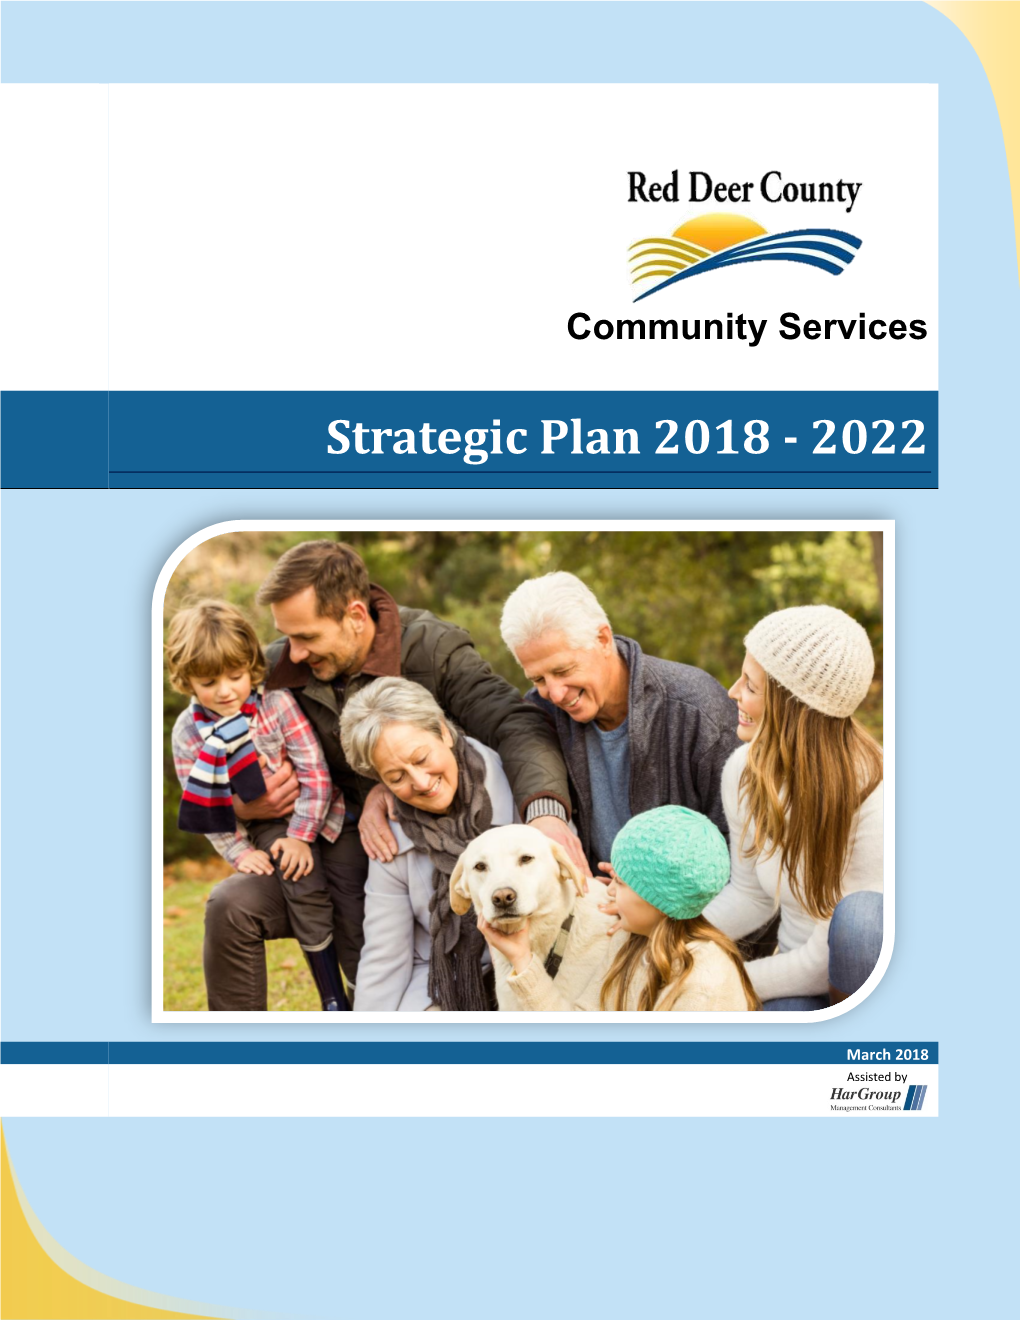 Red Deer County Community Services Strategic Plan 2018-2022